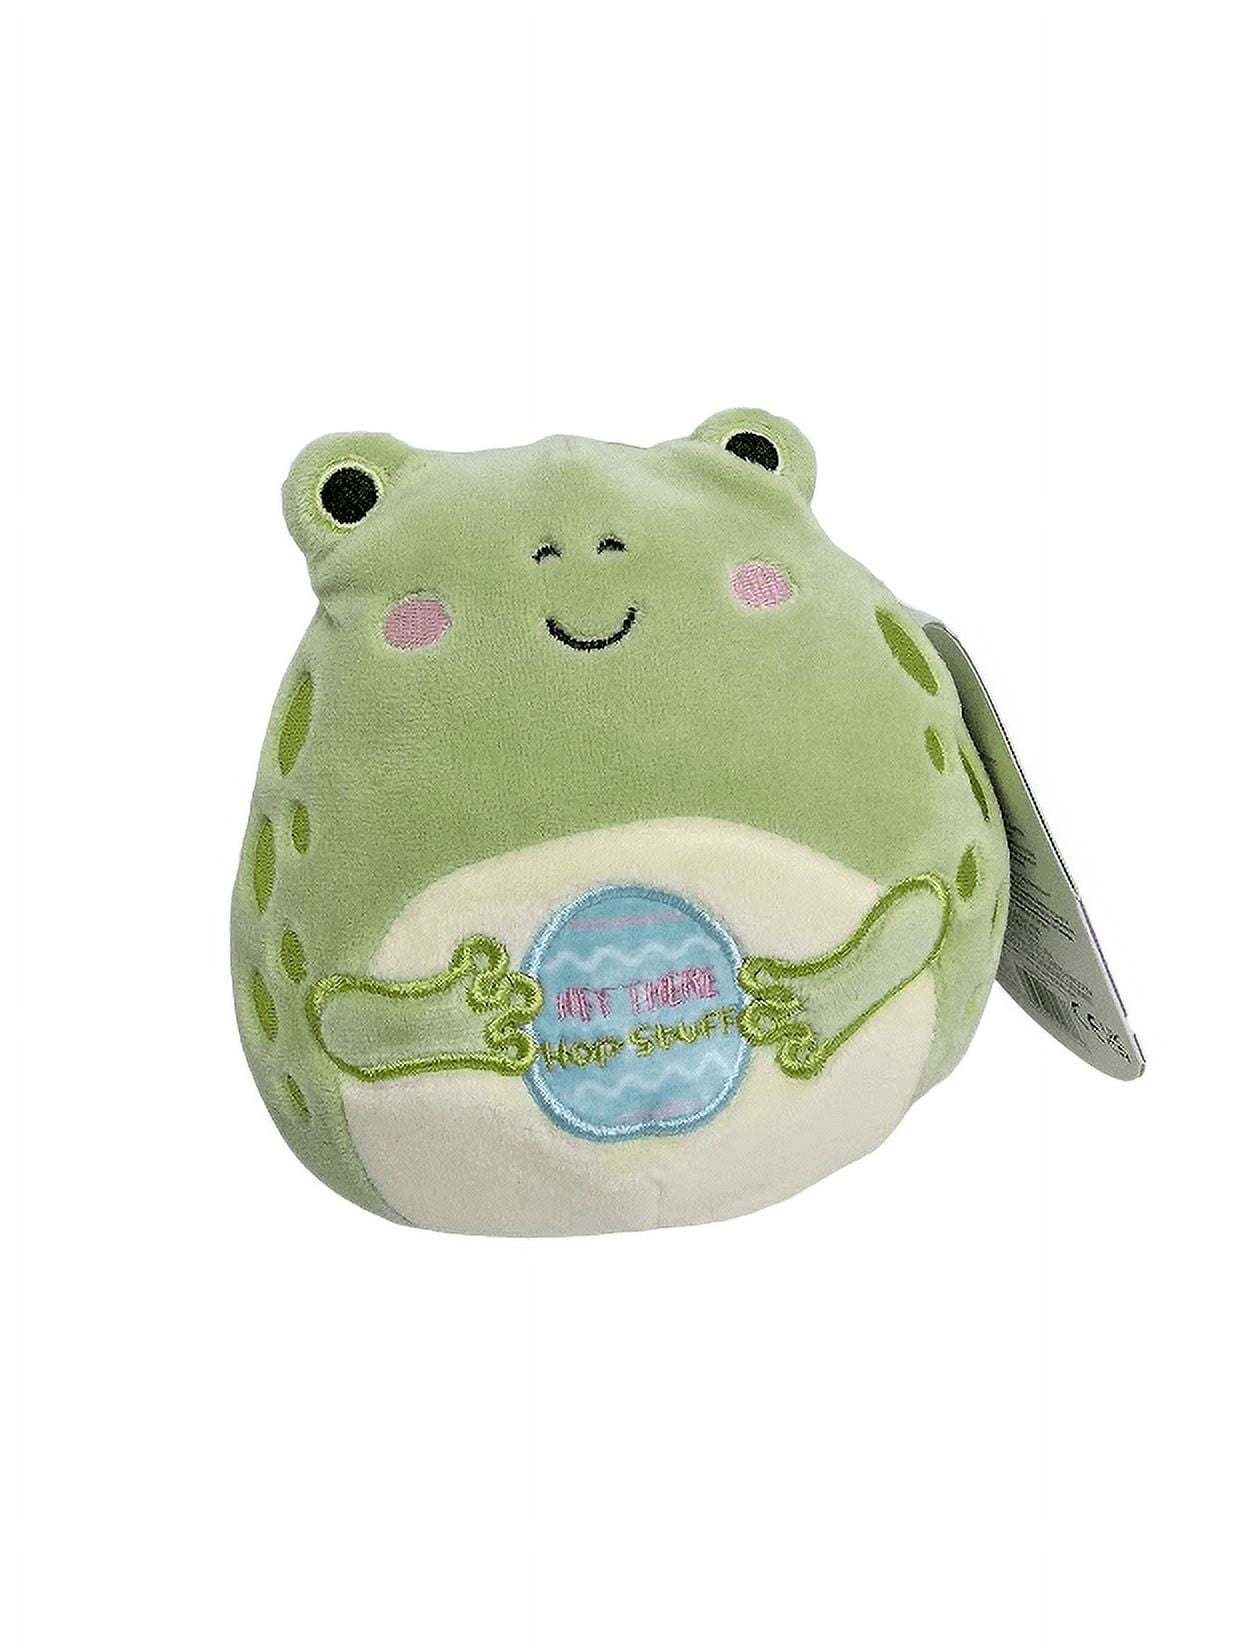 Squishmallows Official Kellytoys Plush 5 Inch Zhen the Green Frog Hey  There Hot Stuff Easter Edition Ultimate Soft Plush Stuffed Toy 